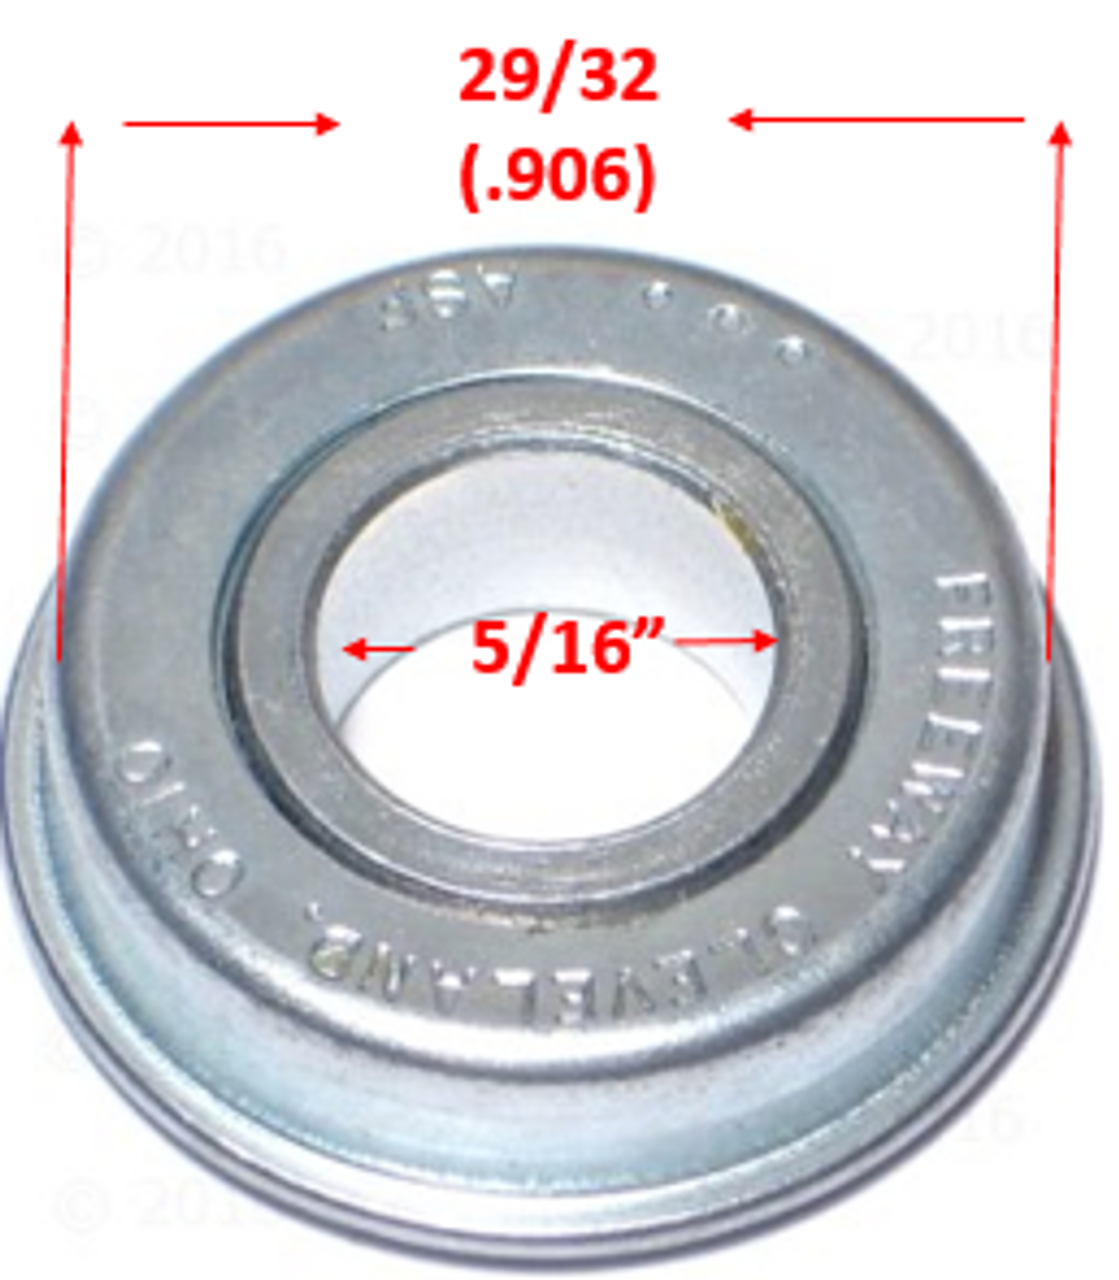 B30 - 5/16" X 29/32" (.906) FLANGED BEARING Caster. Sold as Pack of 4